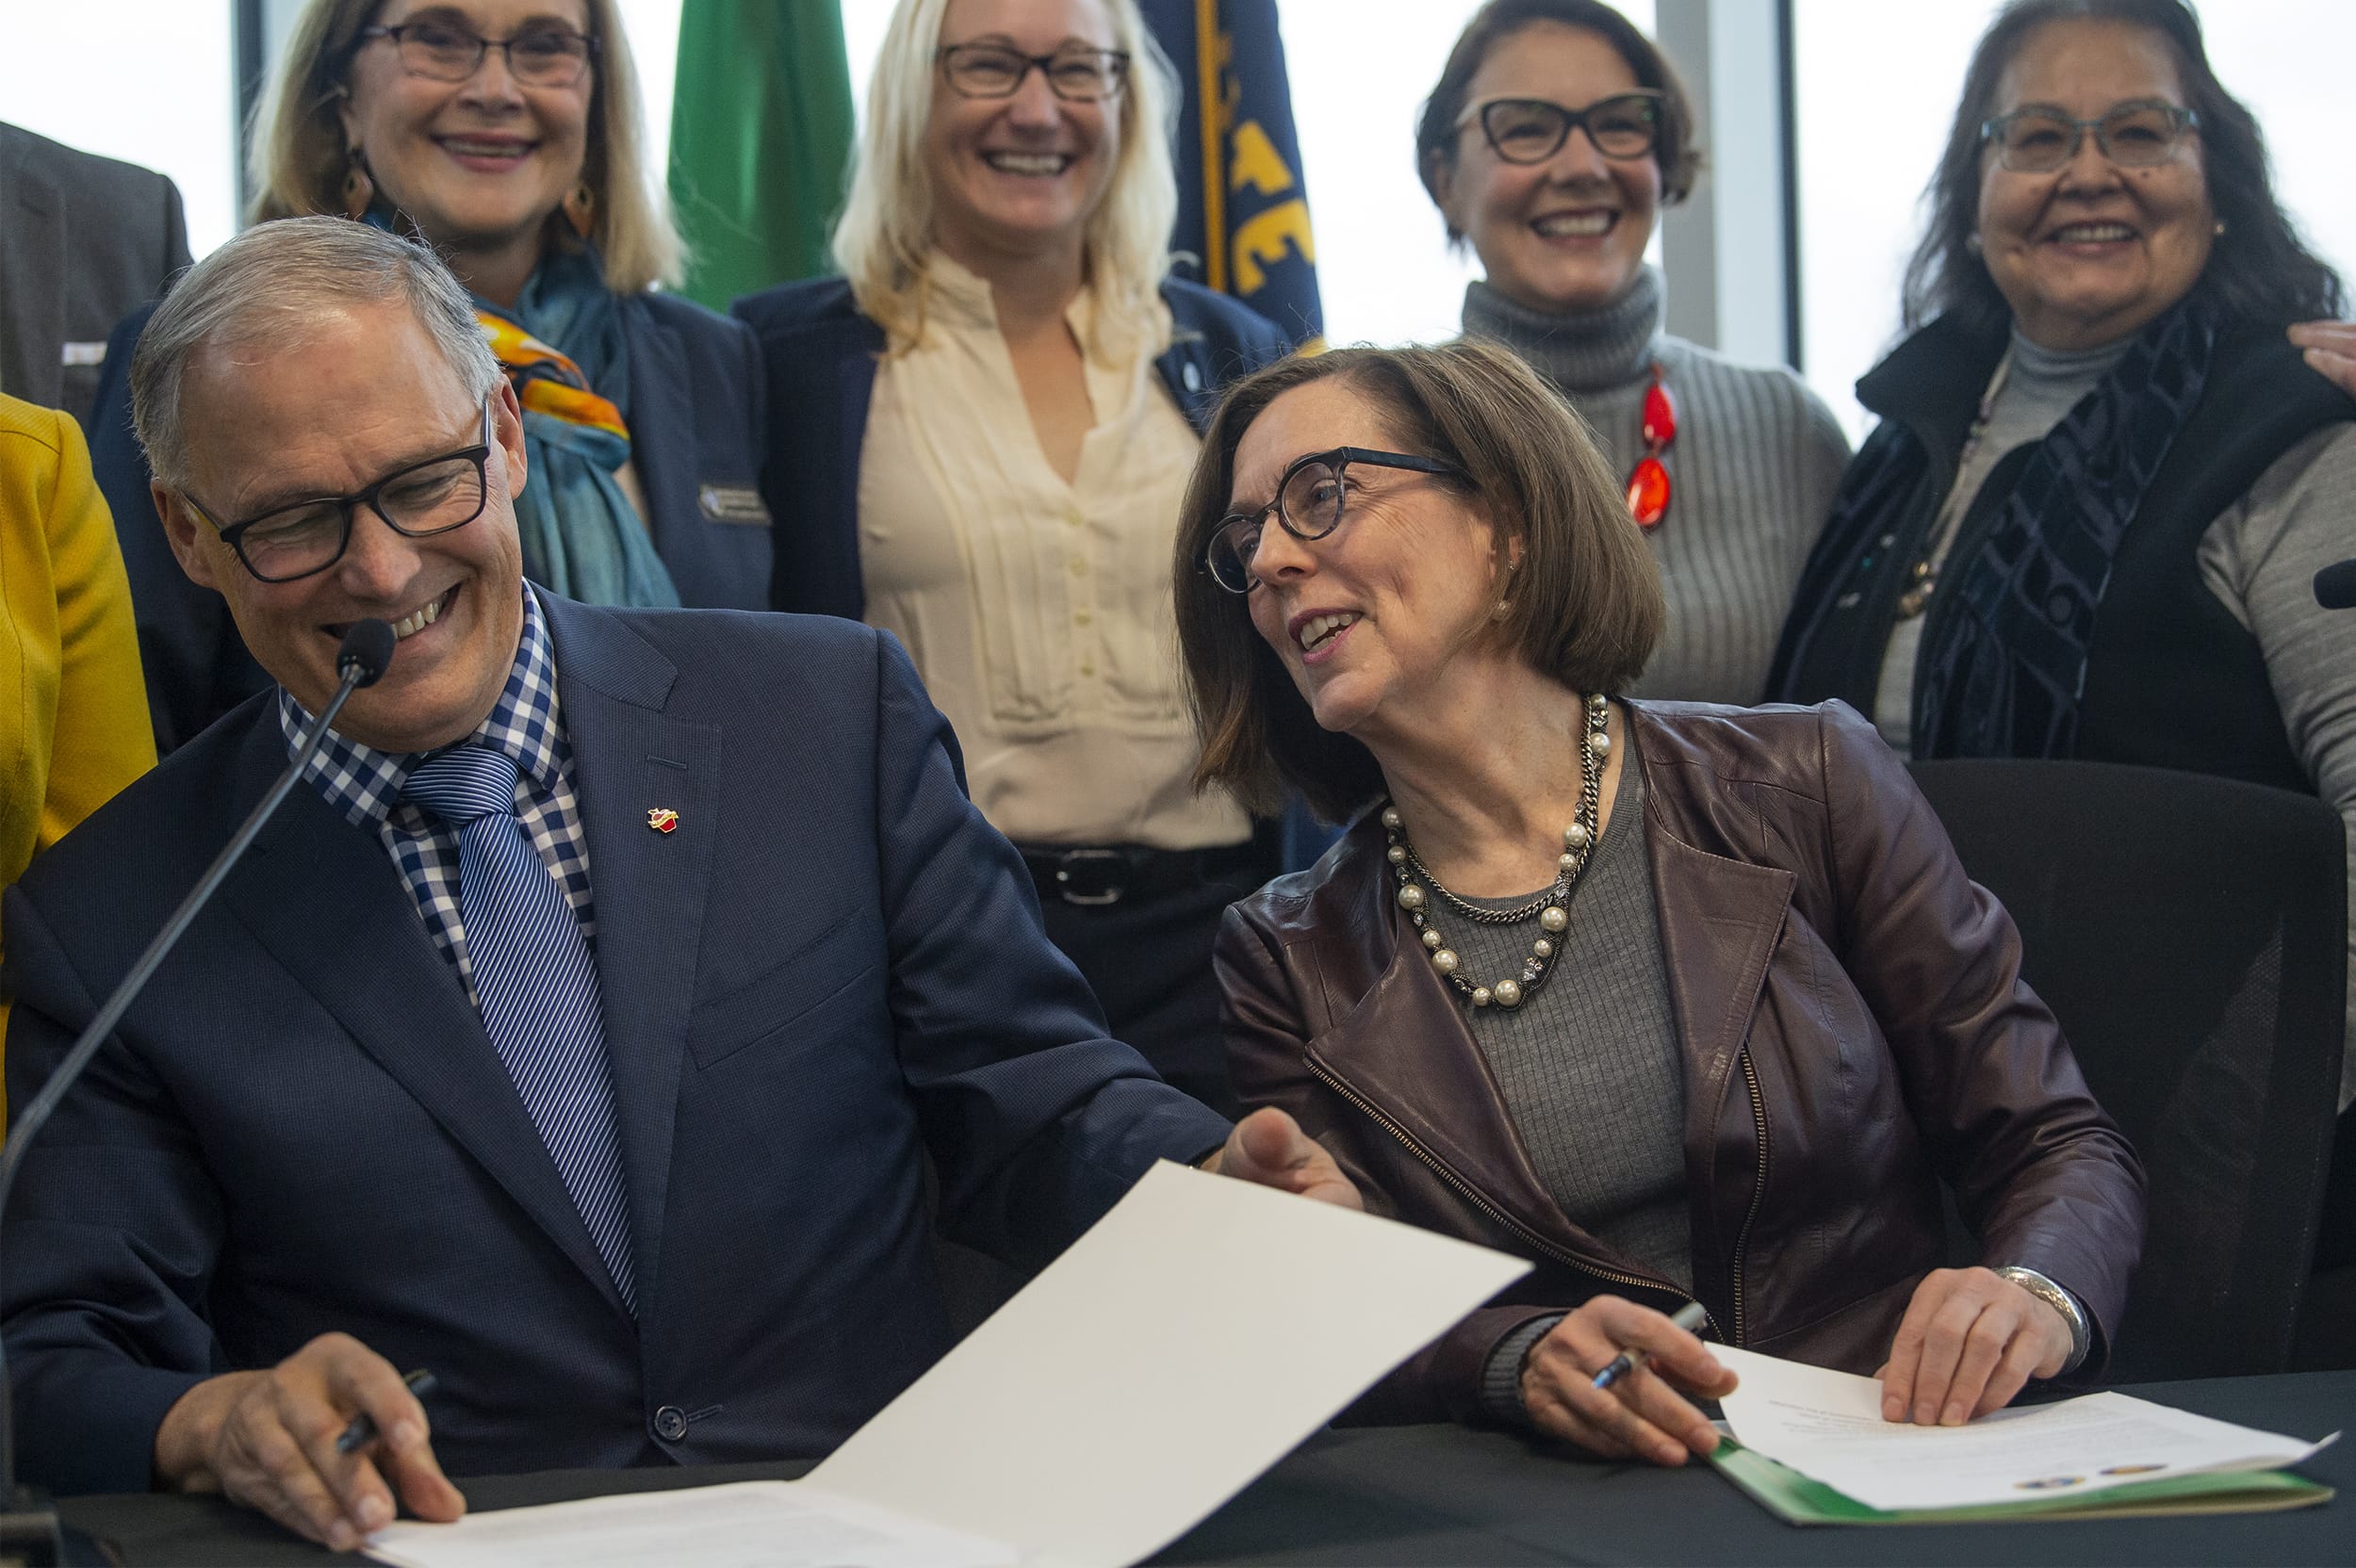 Washington Gov. Jay Inslee, left, and Oregon Gov. Kate Brown celebrate with supporters after signing a memorandum of intent to replace the Interstate 5 bridge at the Murdock Charitable Trust on Monday morning, Nov. 18, 2019.